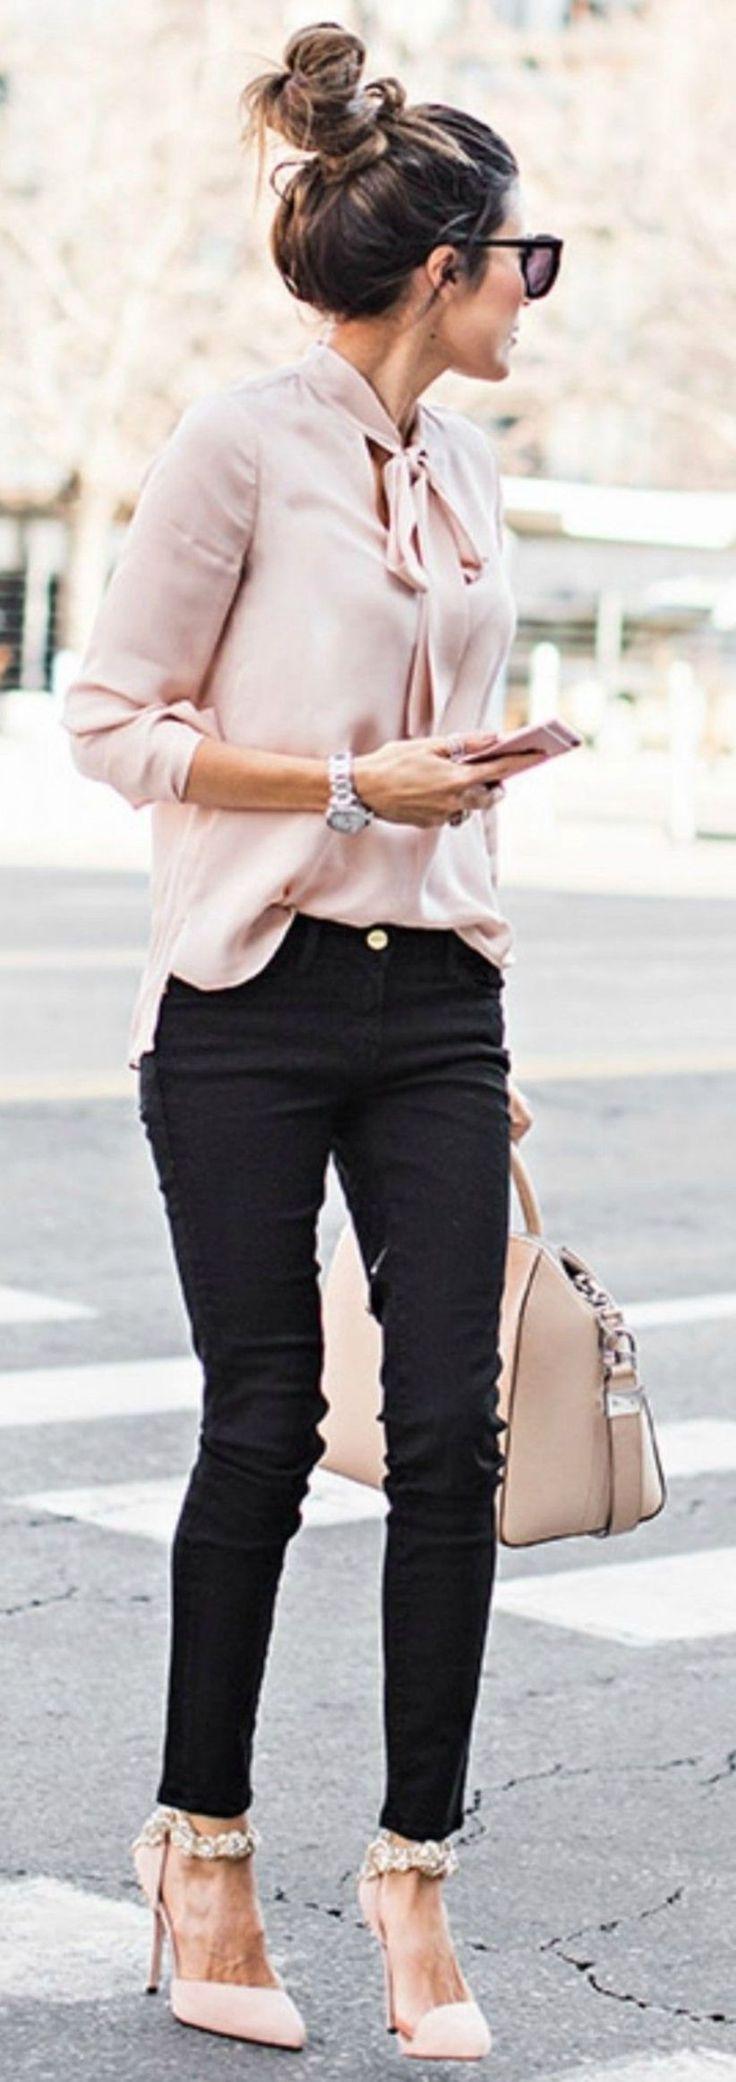 Wedding - 16 Trendy Ways To Wear Jeans To The Office In 2018